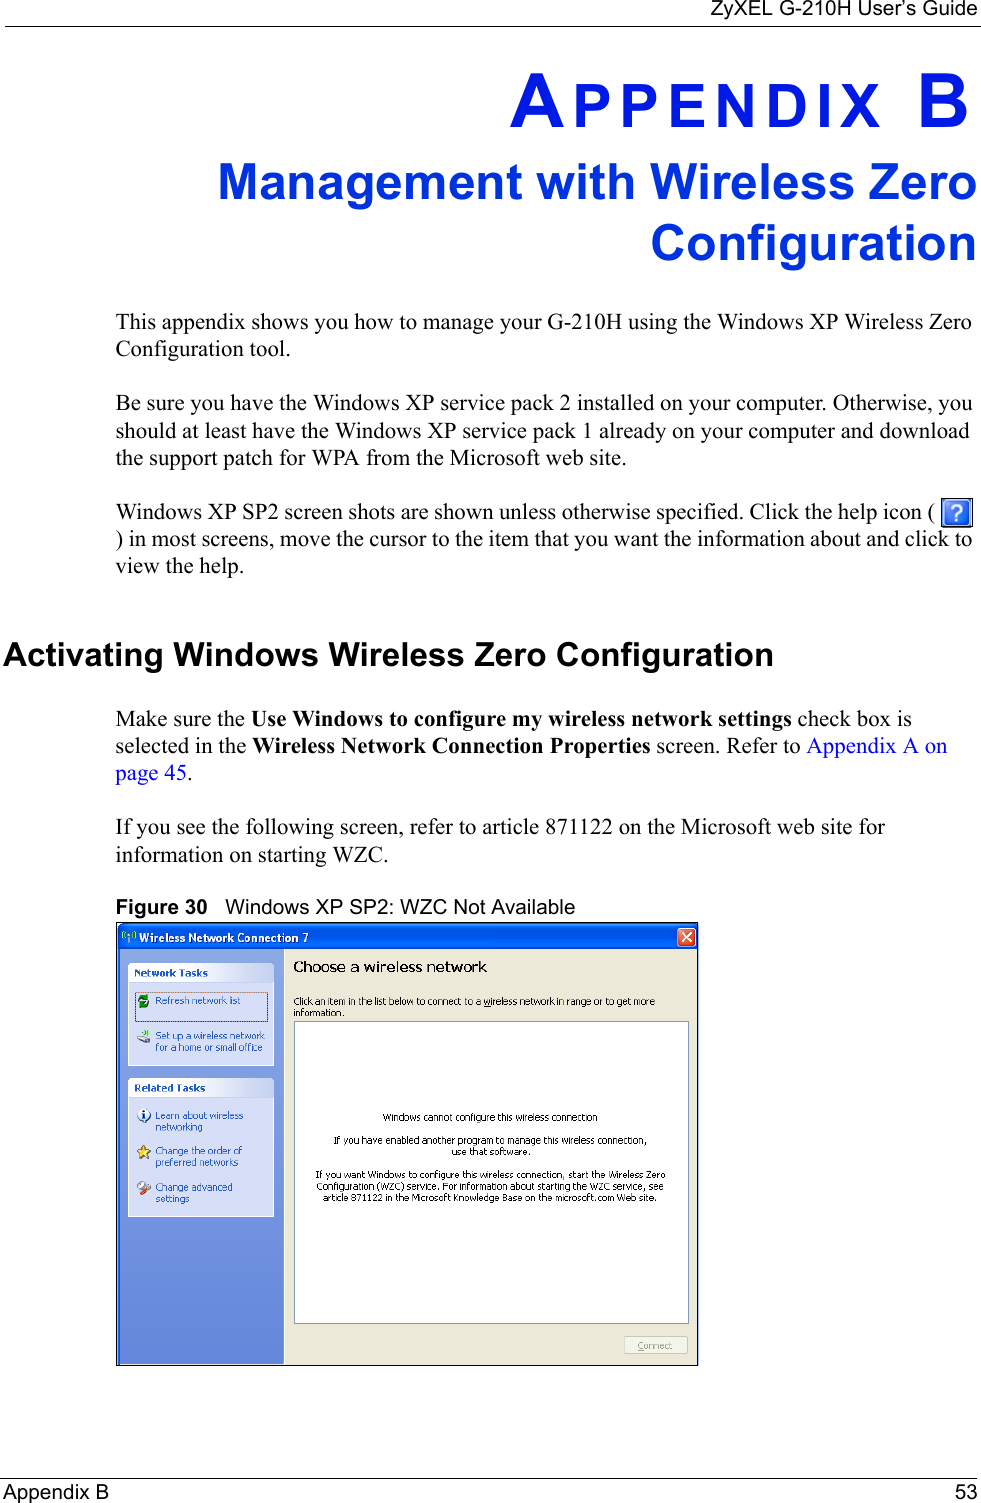 ZyXEL G-210H User’s GuideAppendix B 53APPENDIX BManagement with Wireless ZeroConfigurationThis appendix shows you how to manage your G-210H using the Windows XP Wireless Zero Configuration tool.Be sure you have the Windows XP service pack 2 installed on your computer. Otherwise, you should at least have the Windows XP service pack 1 already on your computer and download the support patch for WPA from the Microsoft web site.Windows XP SP2 screen shots are shown unless otherwise specified. Click the help icon (   ) in most screens, move the cursor to the item that you want the information about and click to view the help.Activating Windows Wireless Zero ConfigurationMake sure the Use Windows to configure my wireless network settings check box is selected in the Wireless Network Connection Properties screen. Refer to Appendix A on page 45.If you see the following screen, refer to article 871122 on the Microsoft web site for information on starting WZC.Figure 30   Windows XP SP2: WZC Not Available